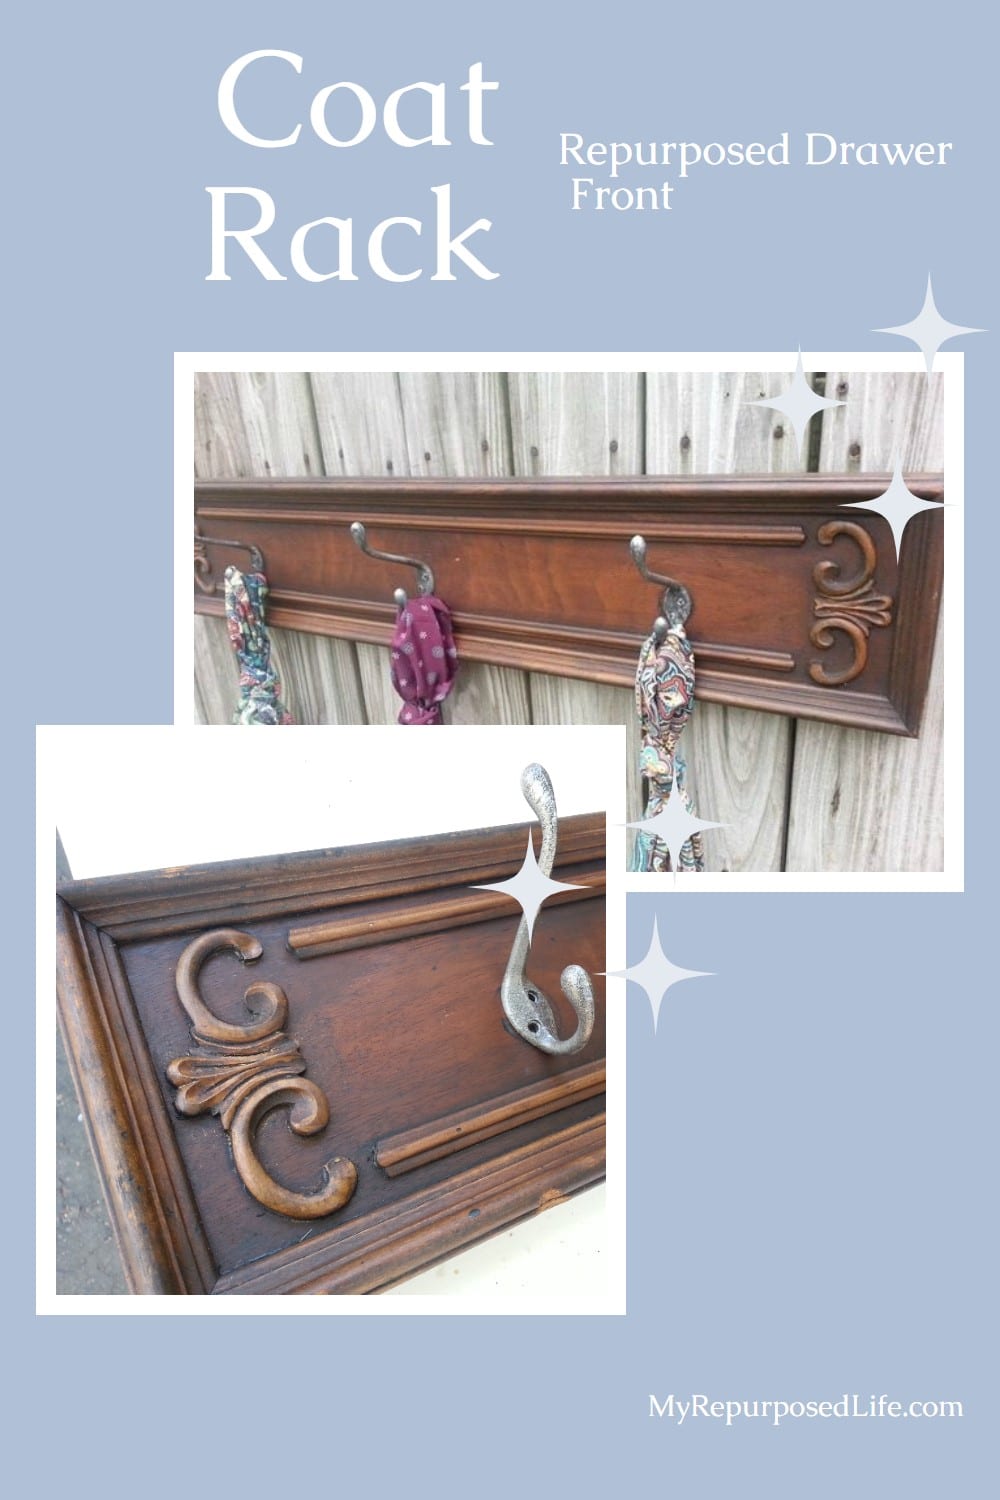 Free drawer fronts get repurposed into hook racks perfect for hats, scarves, jewelry and more. Tips on making new coat hooks look vintage to add to the appeal of the vintage drawer front. Optional--use vintage doorknobs instead of coat hooks. #MyRepurposedLife #repurposed #furniture #coatrack #hatrack #organization via @repurposedlife